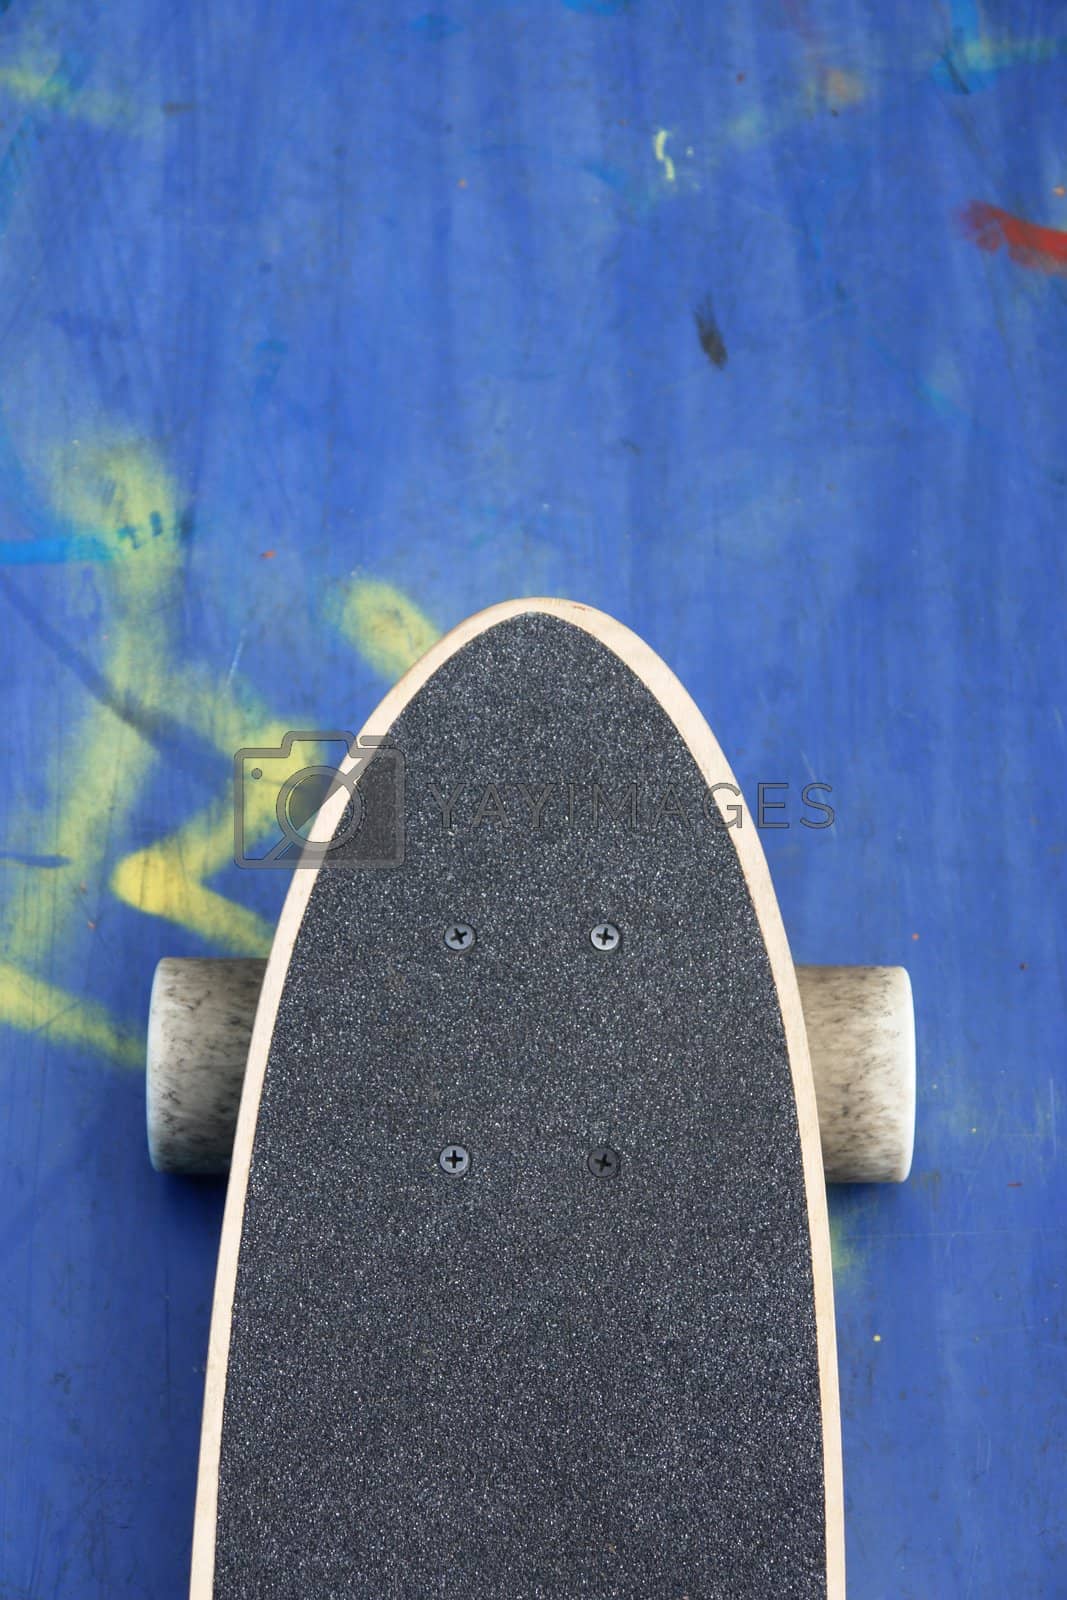 Royalty free image of Skateboards by yucas